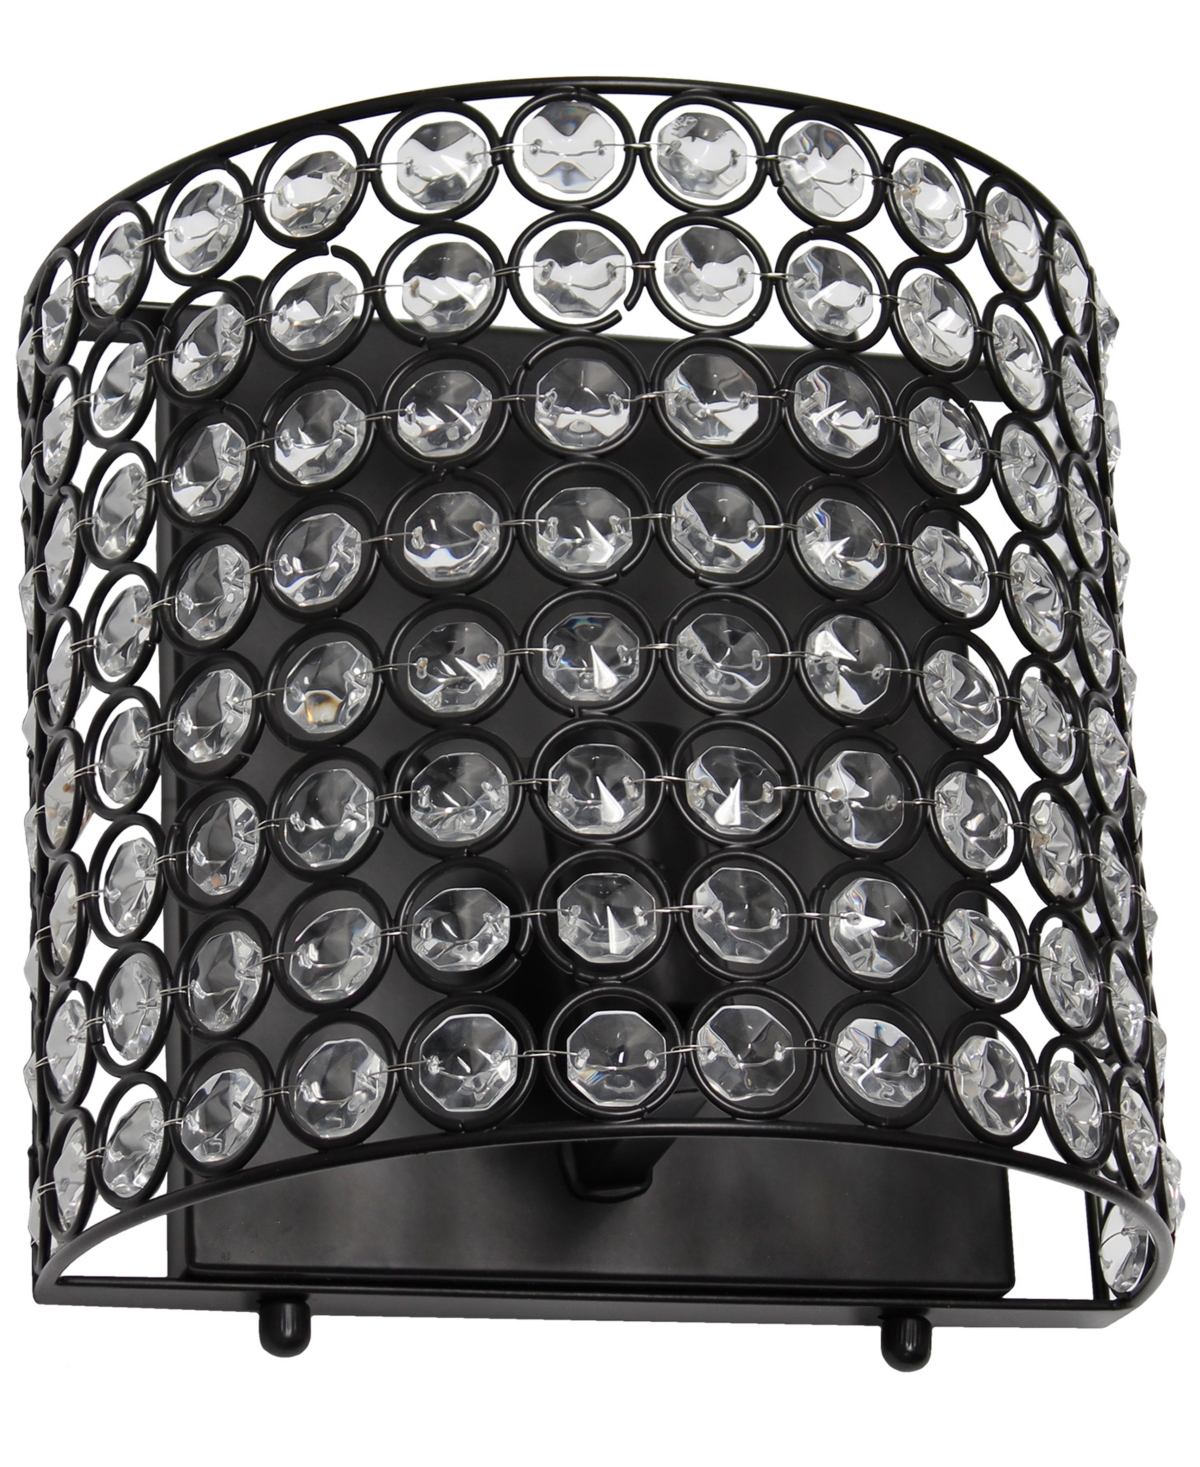 All The Rages 8" Modern Contemporary 1-light Bathroom Vanity Crystal And Metal Wall Sconce Lighting Fixture In Black